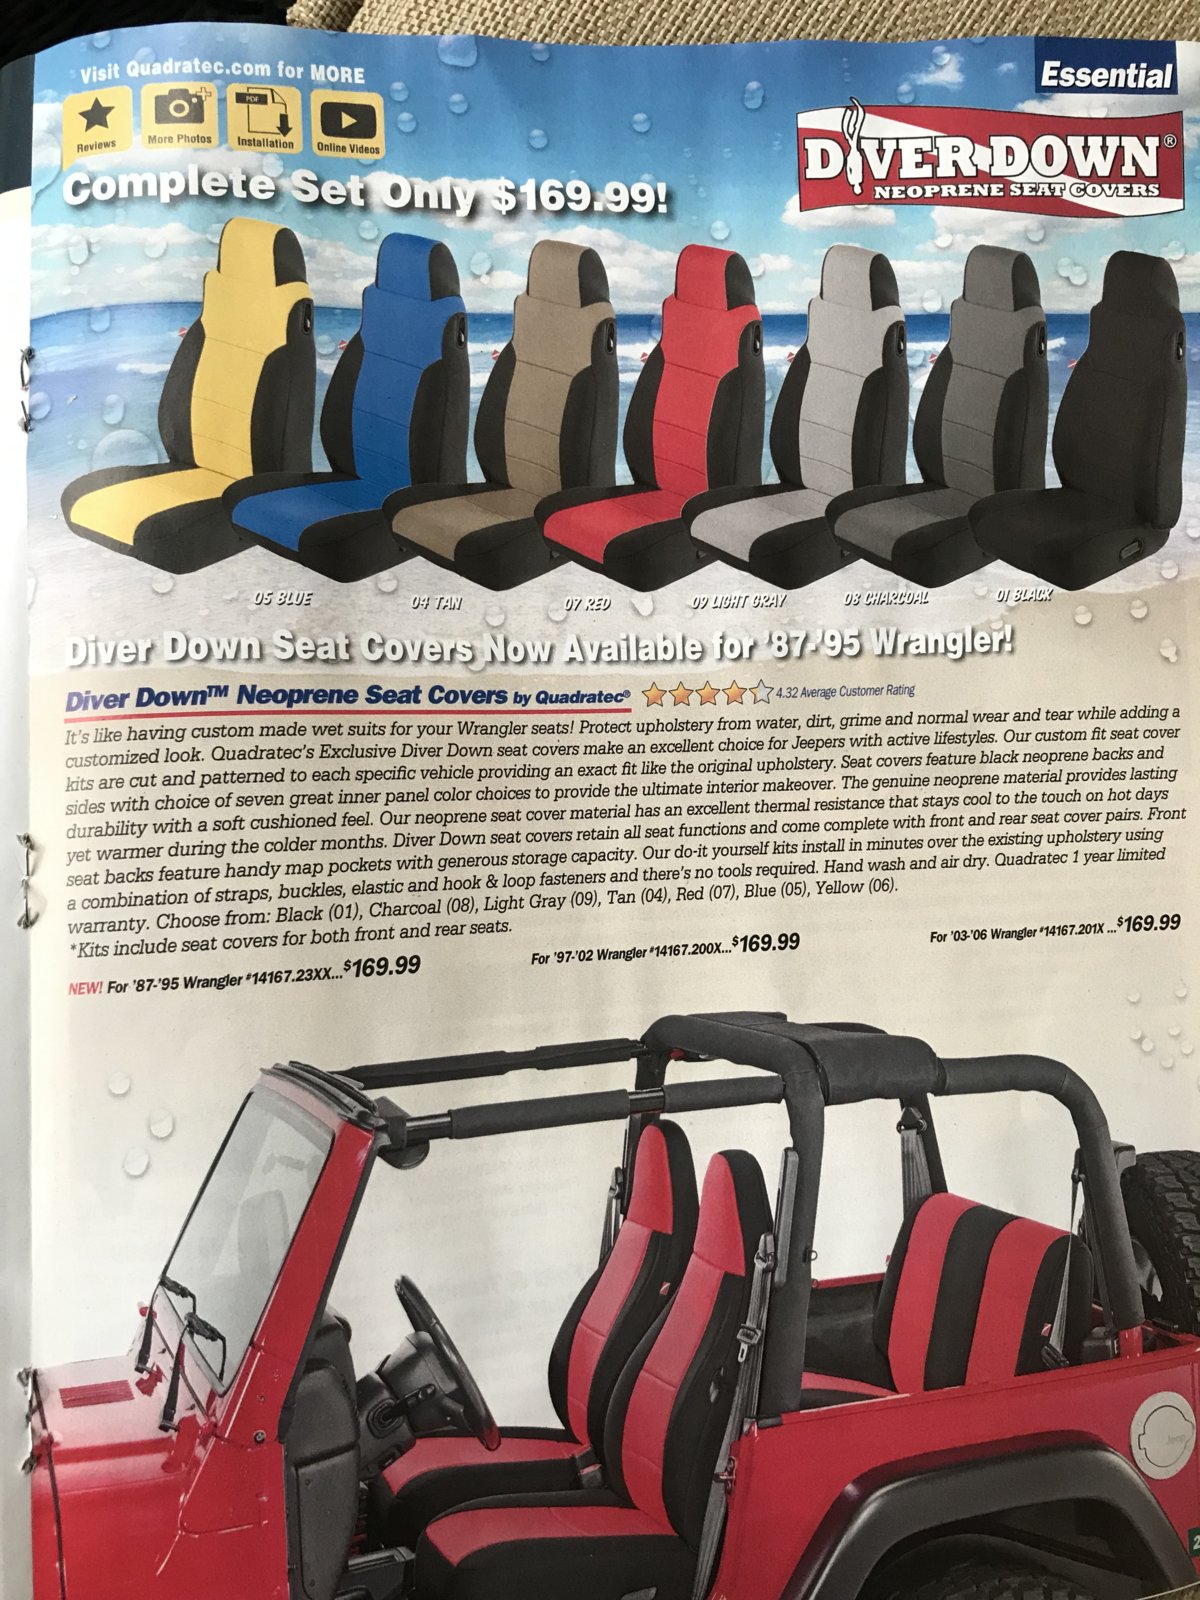 Diver Down seat covers | Jeep Wrangler TJ Forum